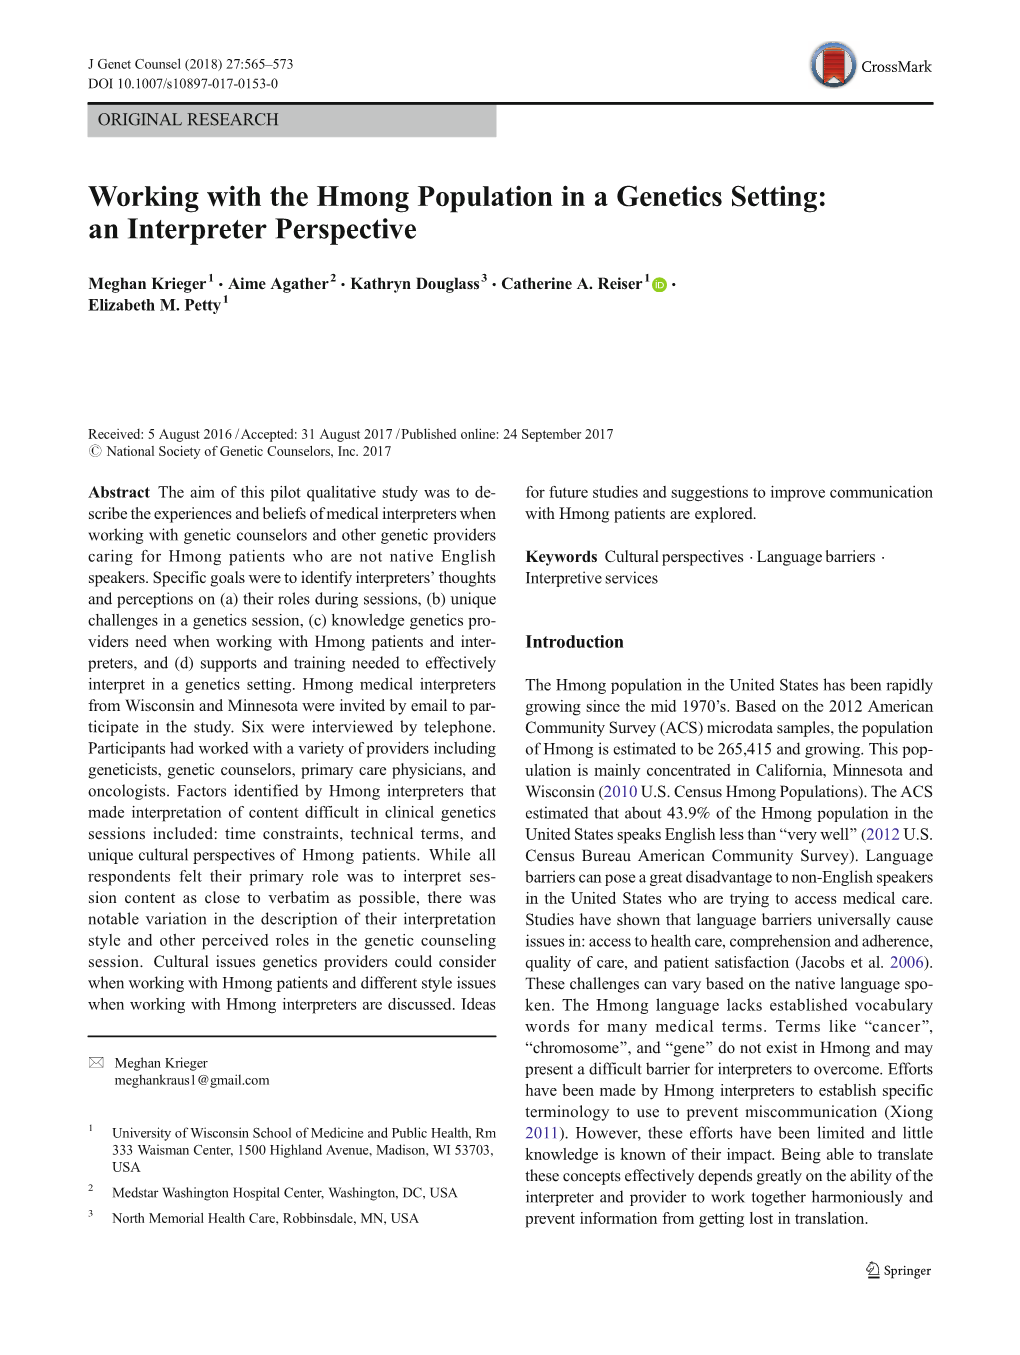 Working with the Hmong Population in a Genetics Setting: an Interpreter Perspective